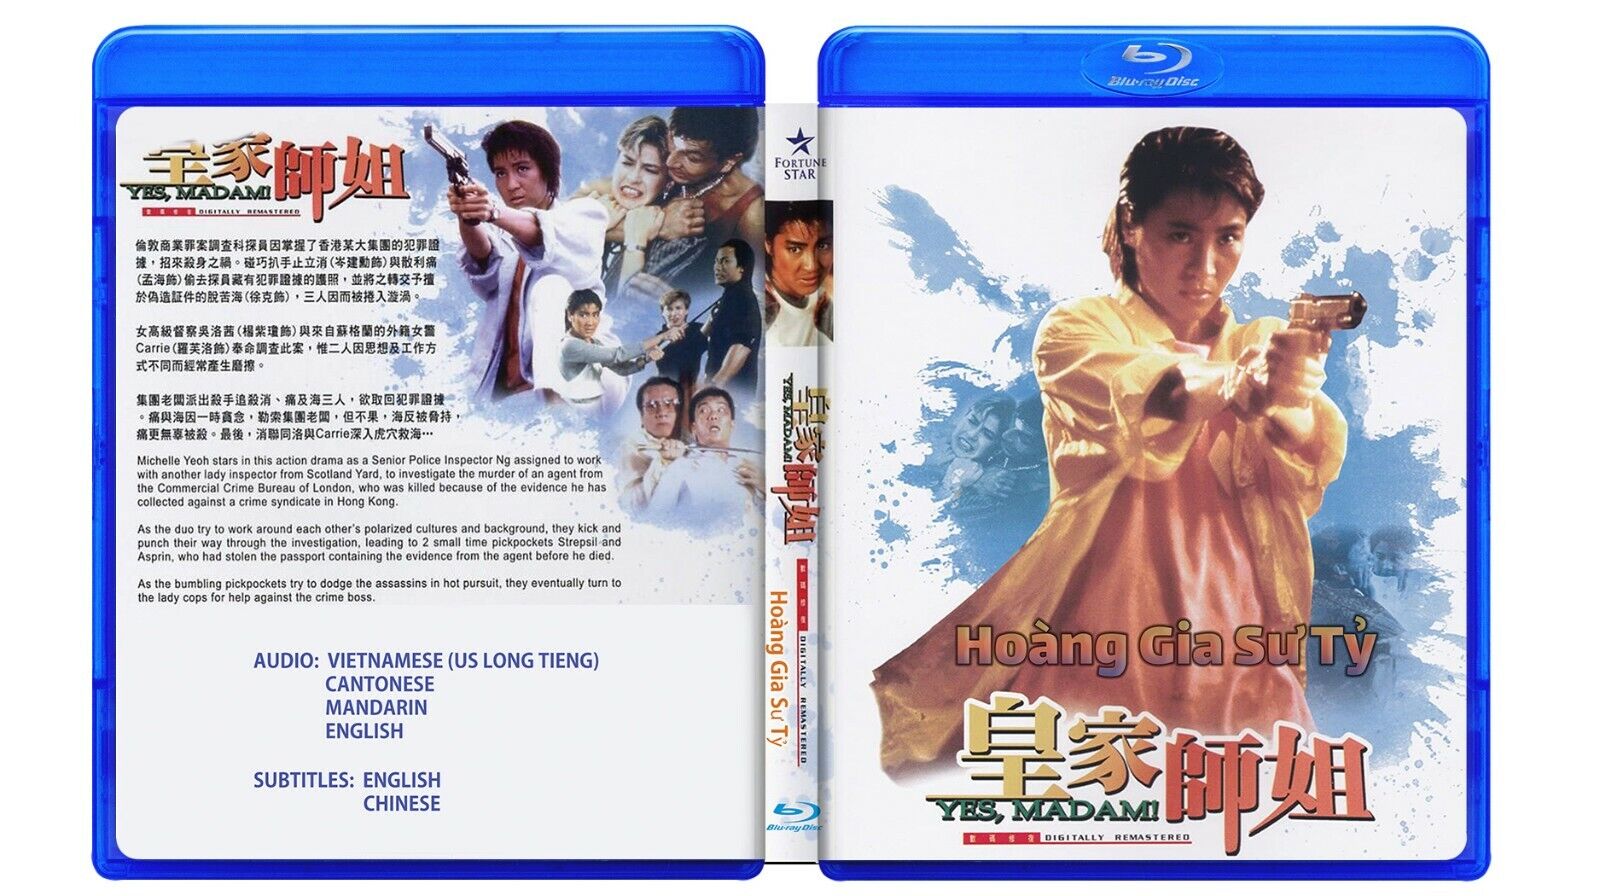 HOANG GIA SU TY - Phim Le HK Bluray - USLT/Eng Dub (read first)